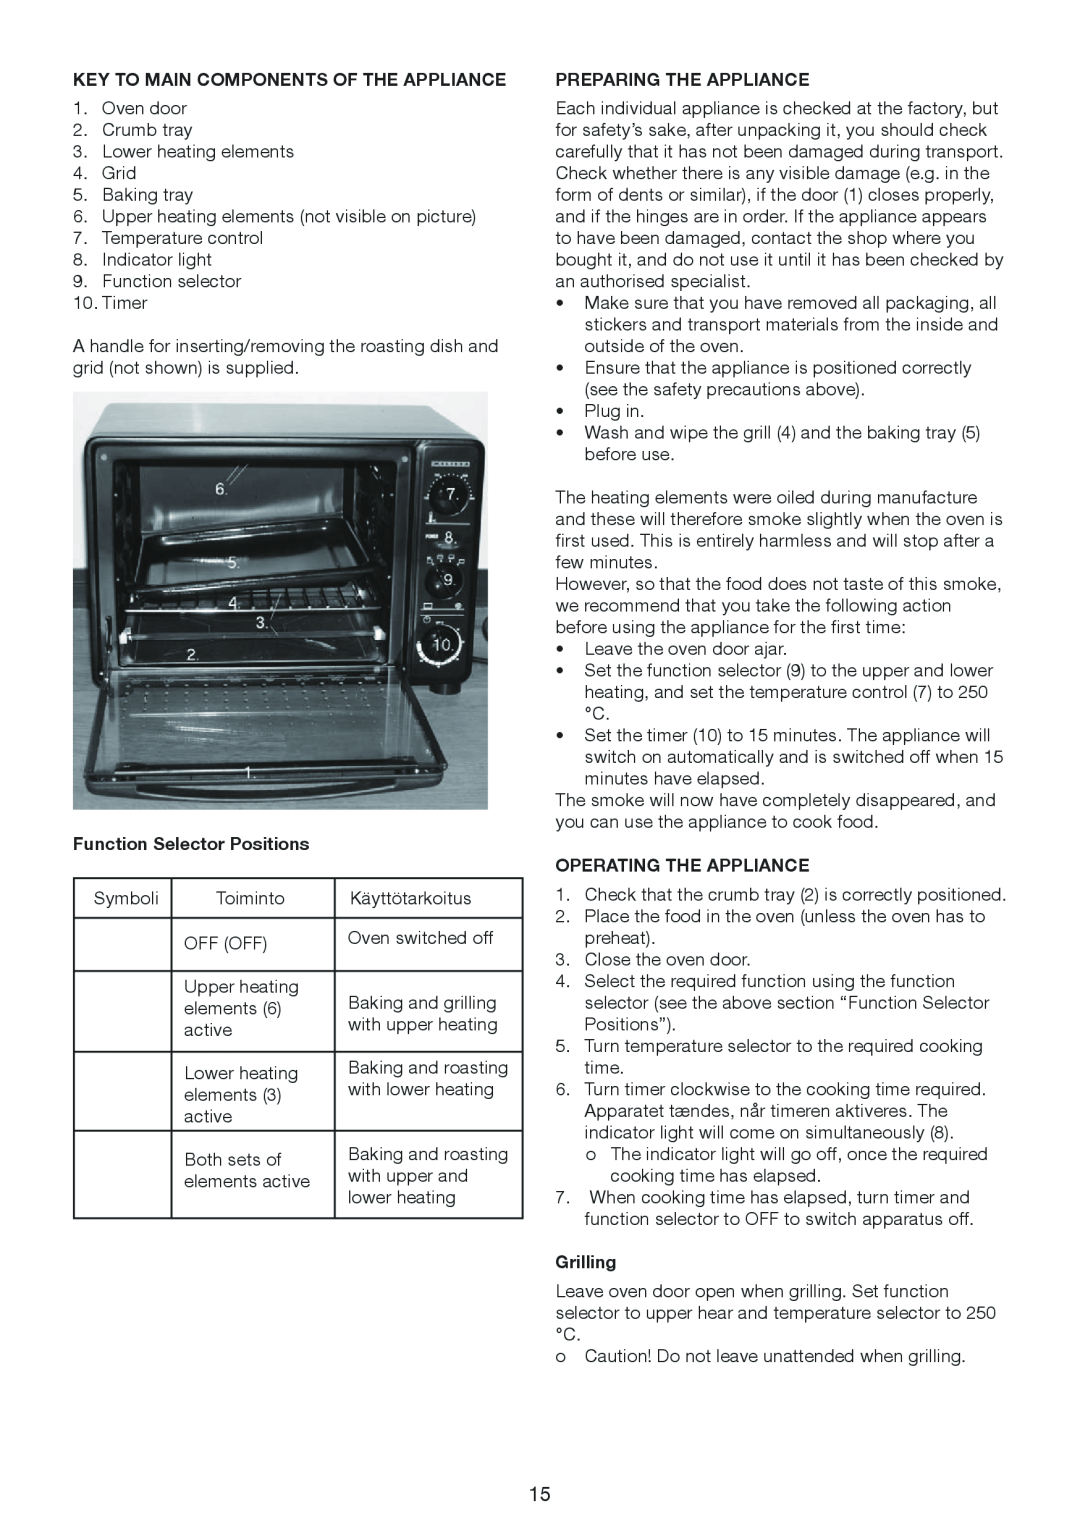 Melissa 4033D Key To Main Components Of The Appliance, Function Selector Positions, Preparing The Appliance, Grilling 